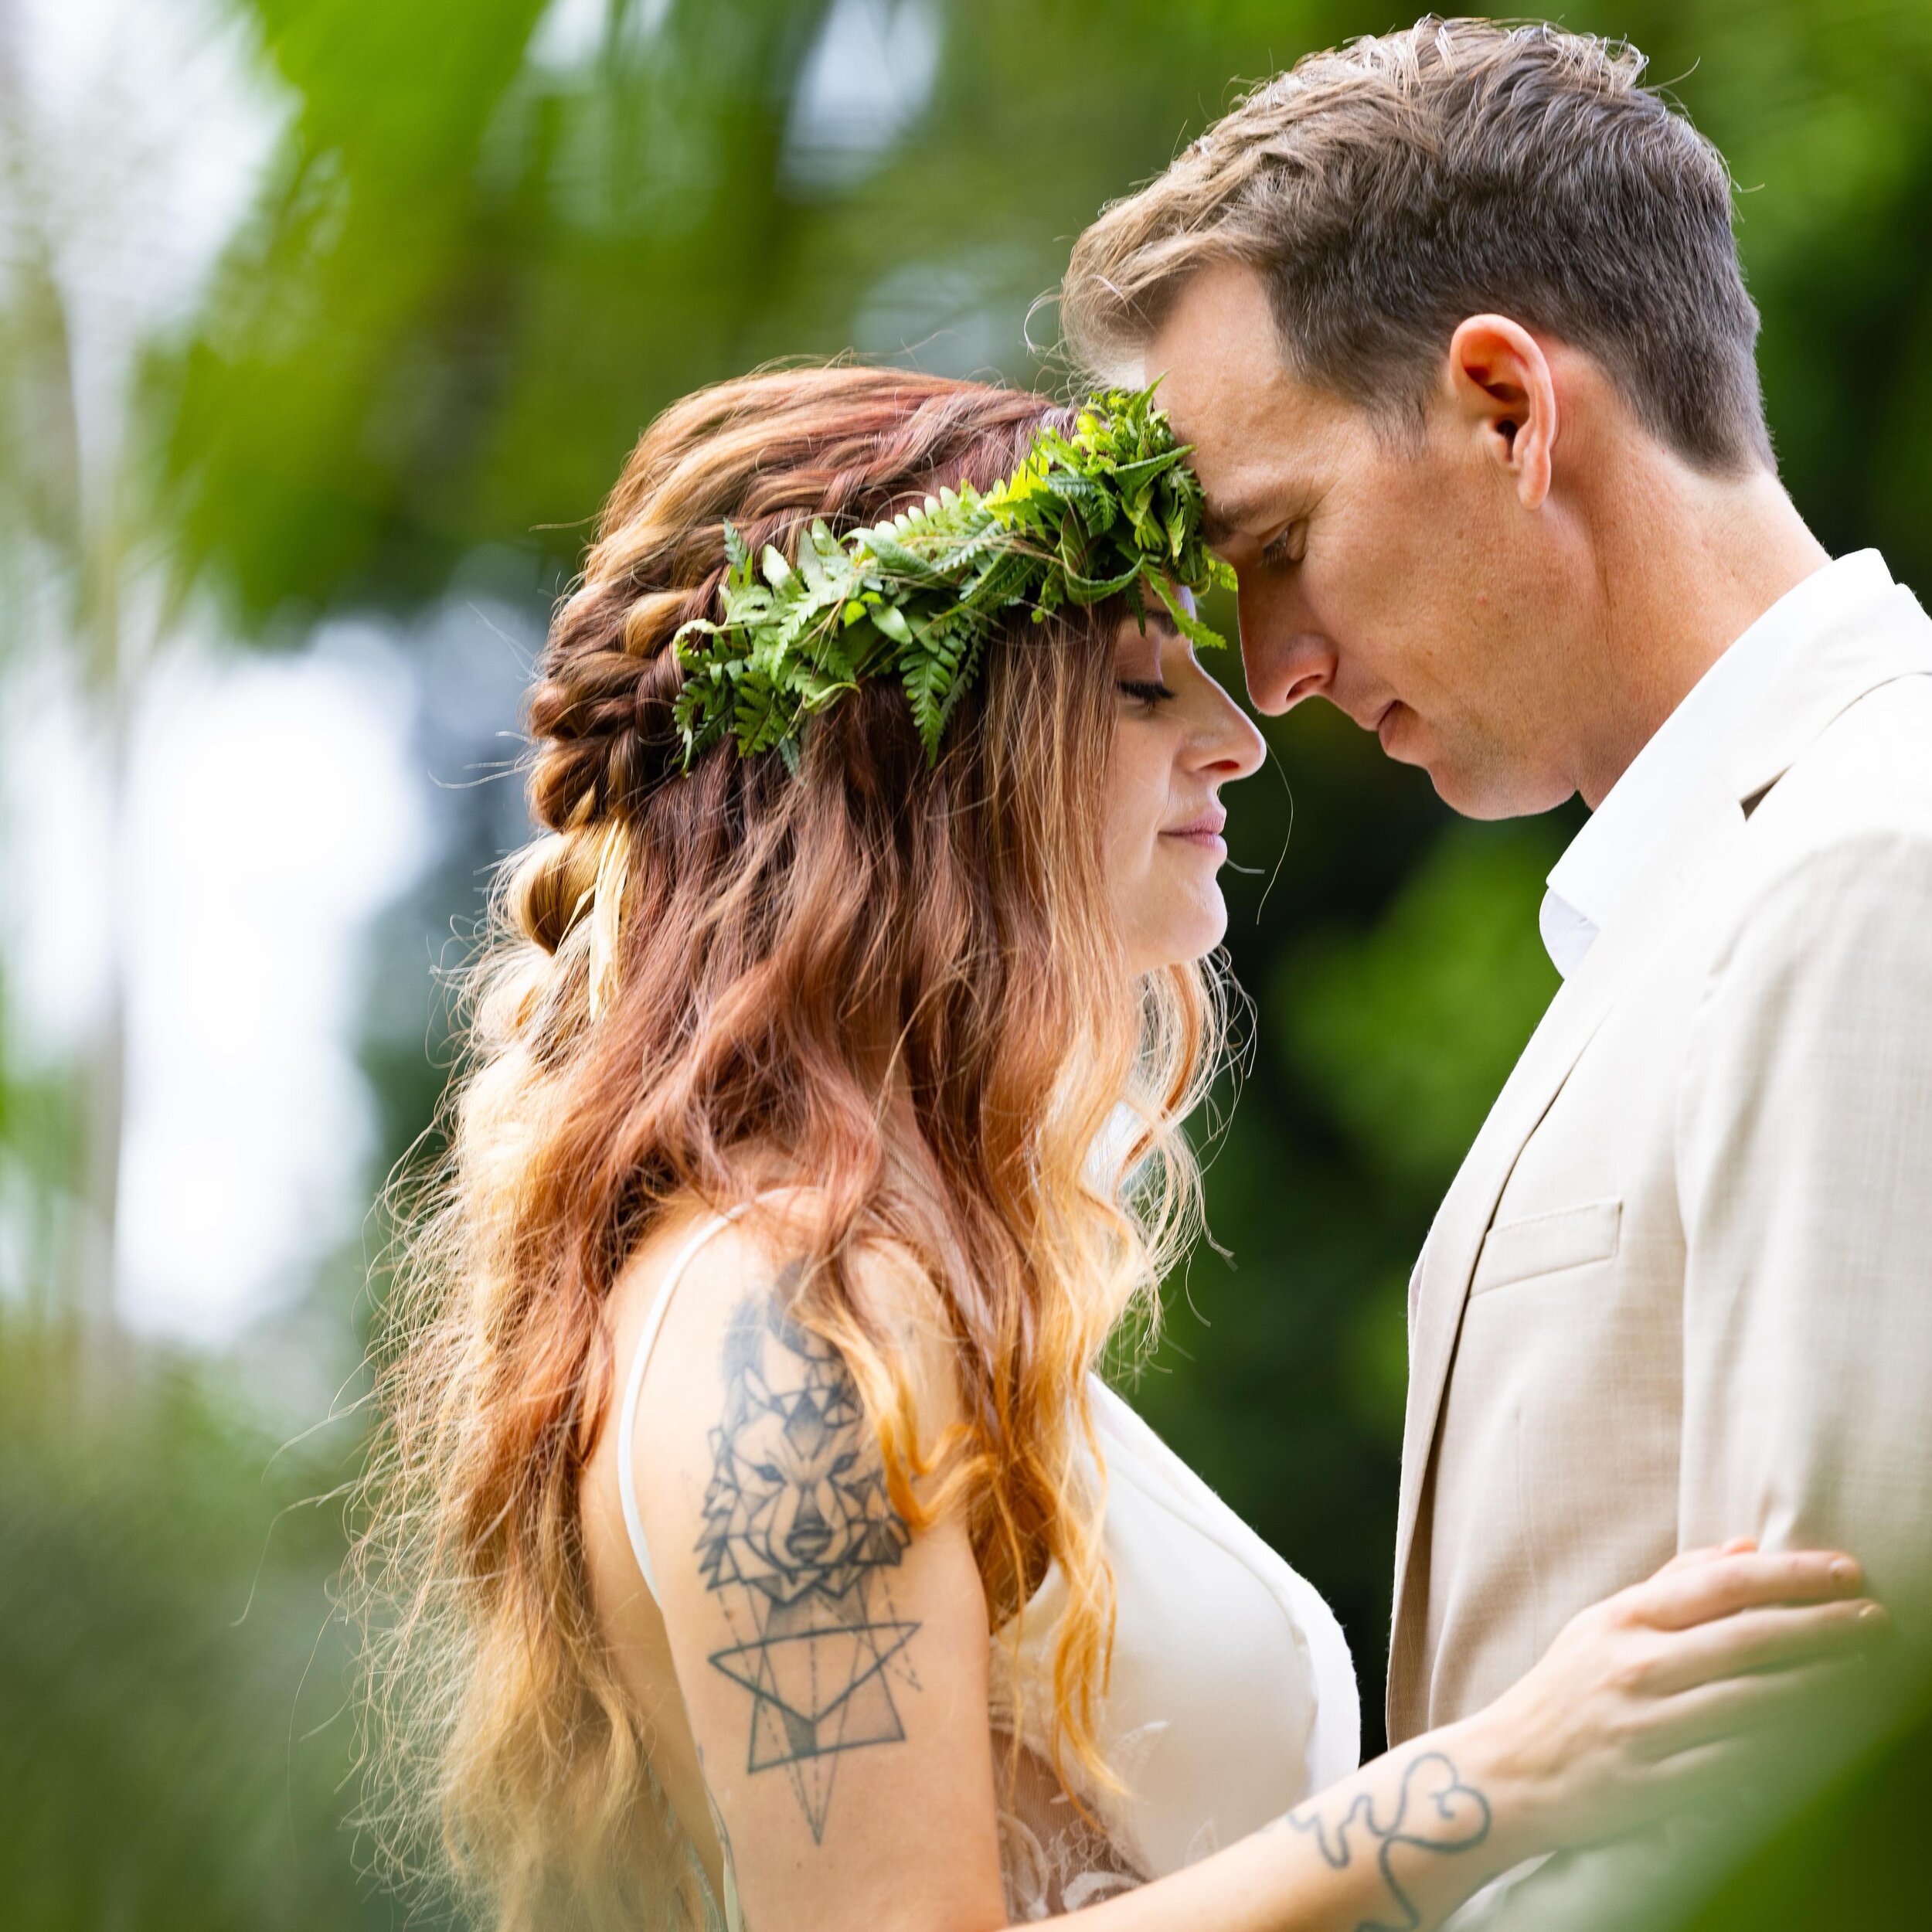 Our lovely couple from Hawaii got married at Kikaua Point Beach and had their reception at Waiopai Gardens. Photography by Toobiah Hoogs. Planning and Cinematography by Beach Glass Weddings.
#beachwedding #hawaiiwedding #hawaiiweddingplanner -#destin